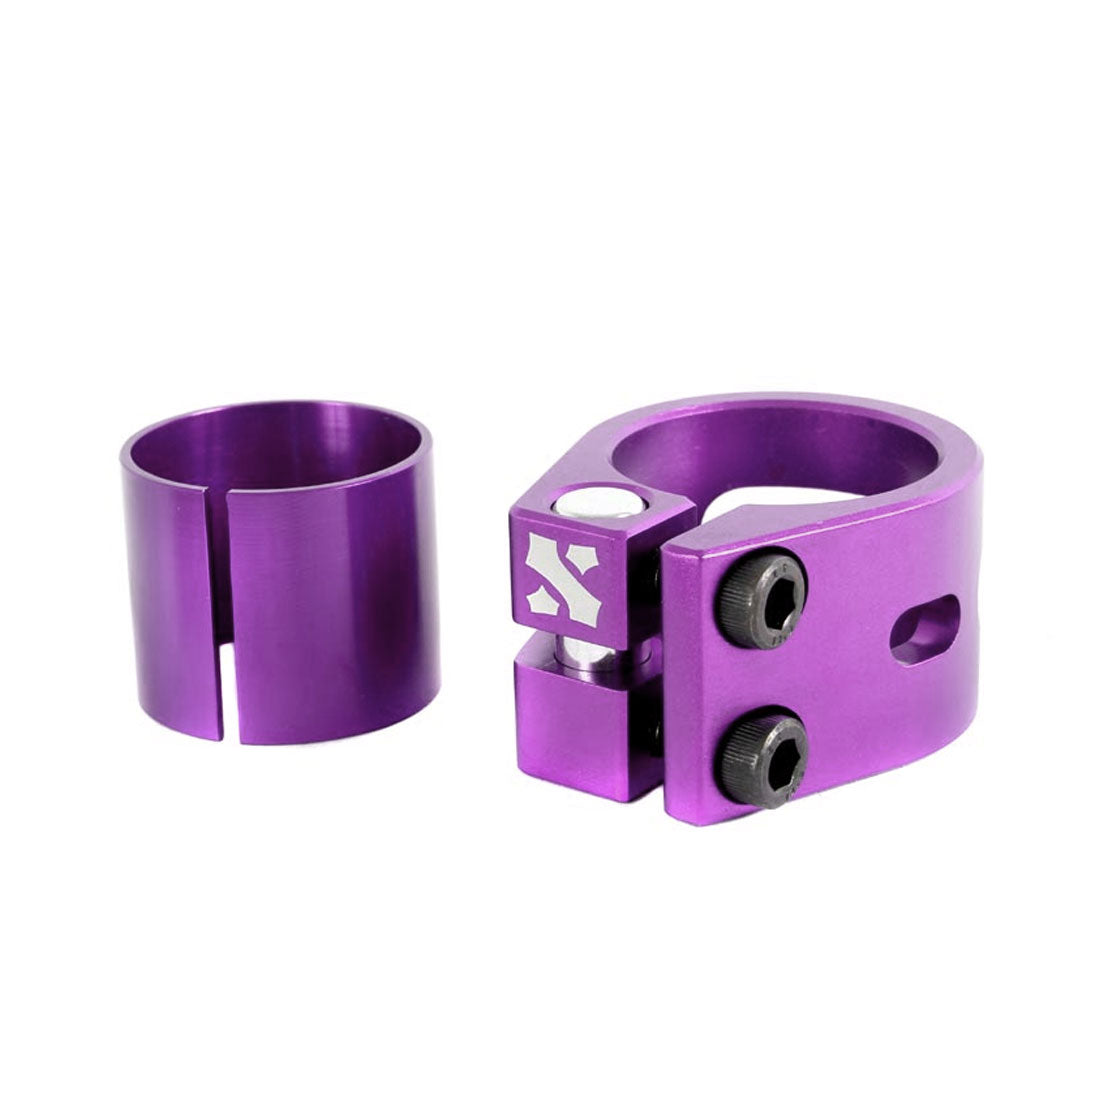 Sacrifice Nutron Collar Clamp - Purple Scooter Headsets and Clamps